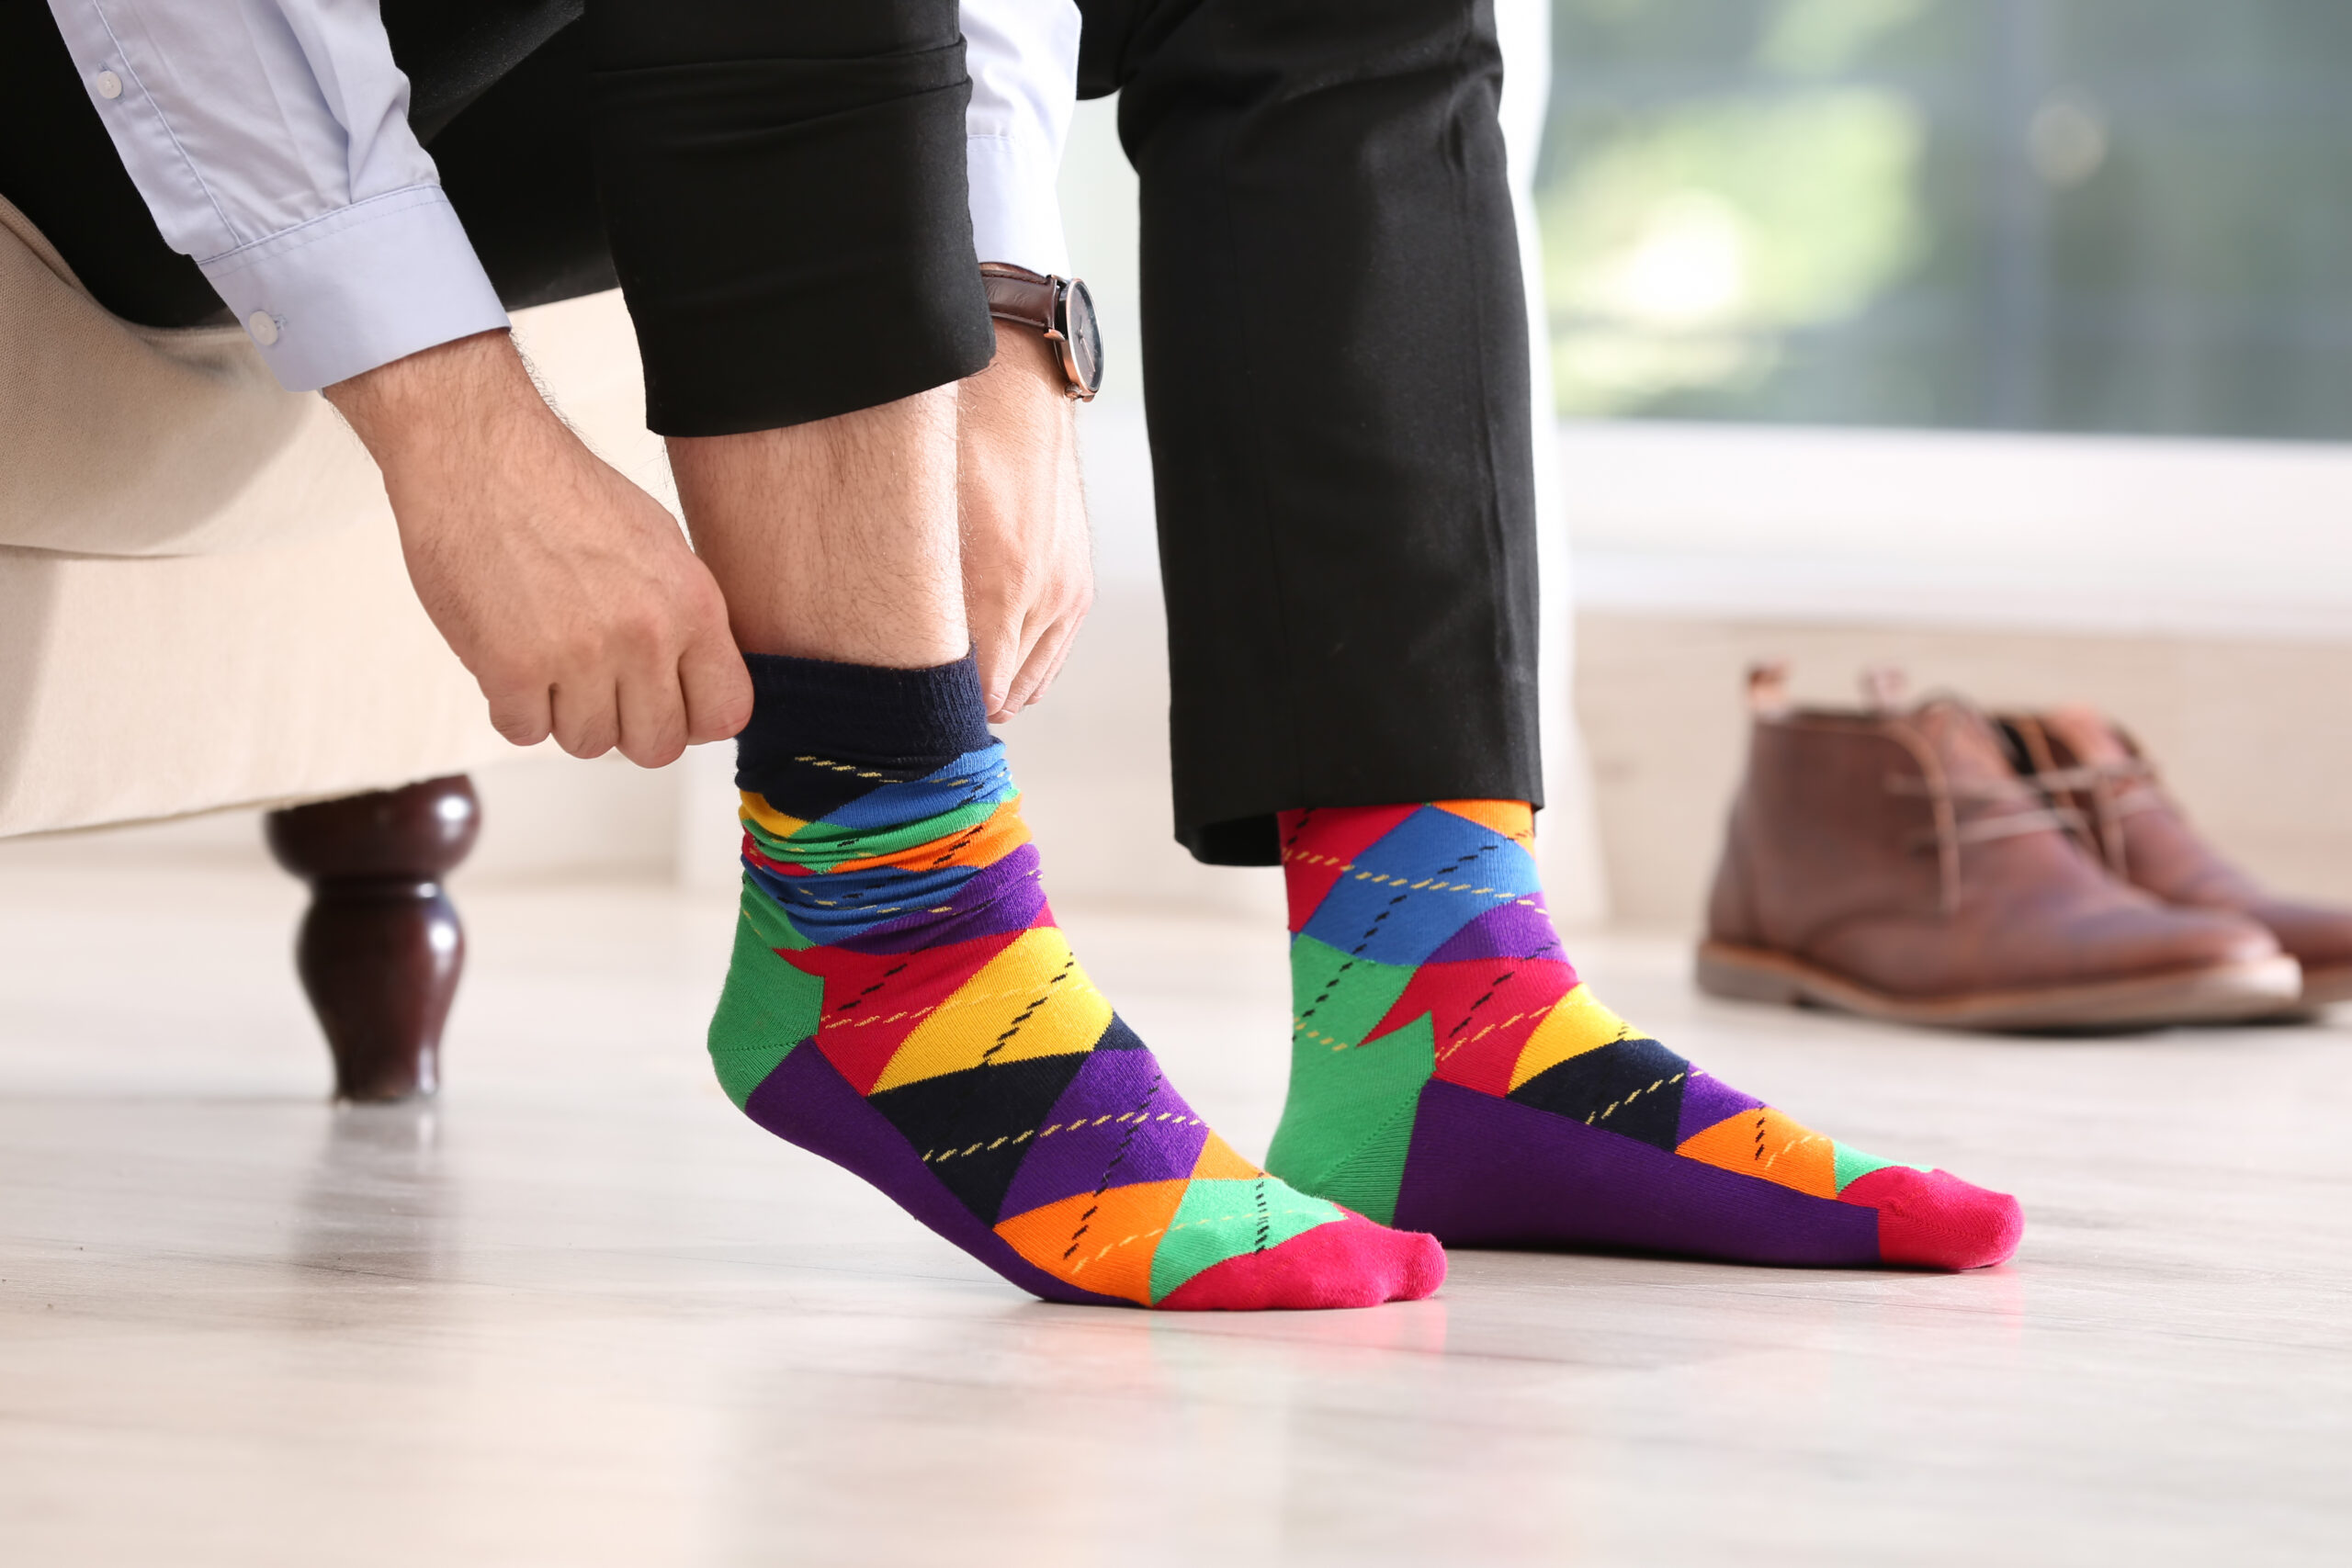 Socks or No Socks: Does Either Contribute to Stinky Shoes? - Shoefresh